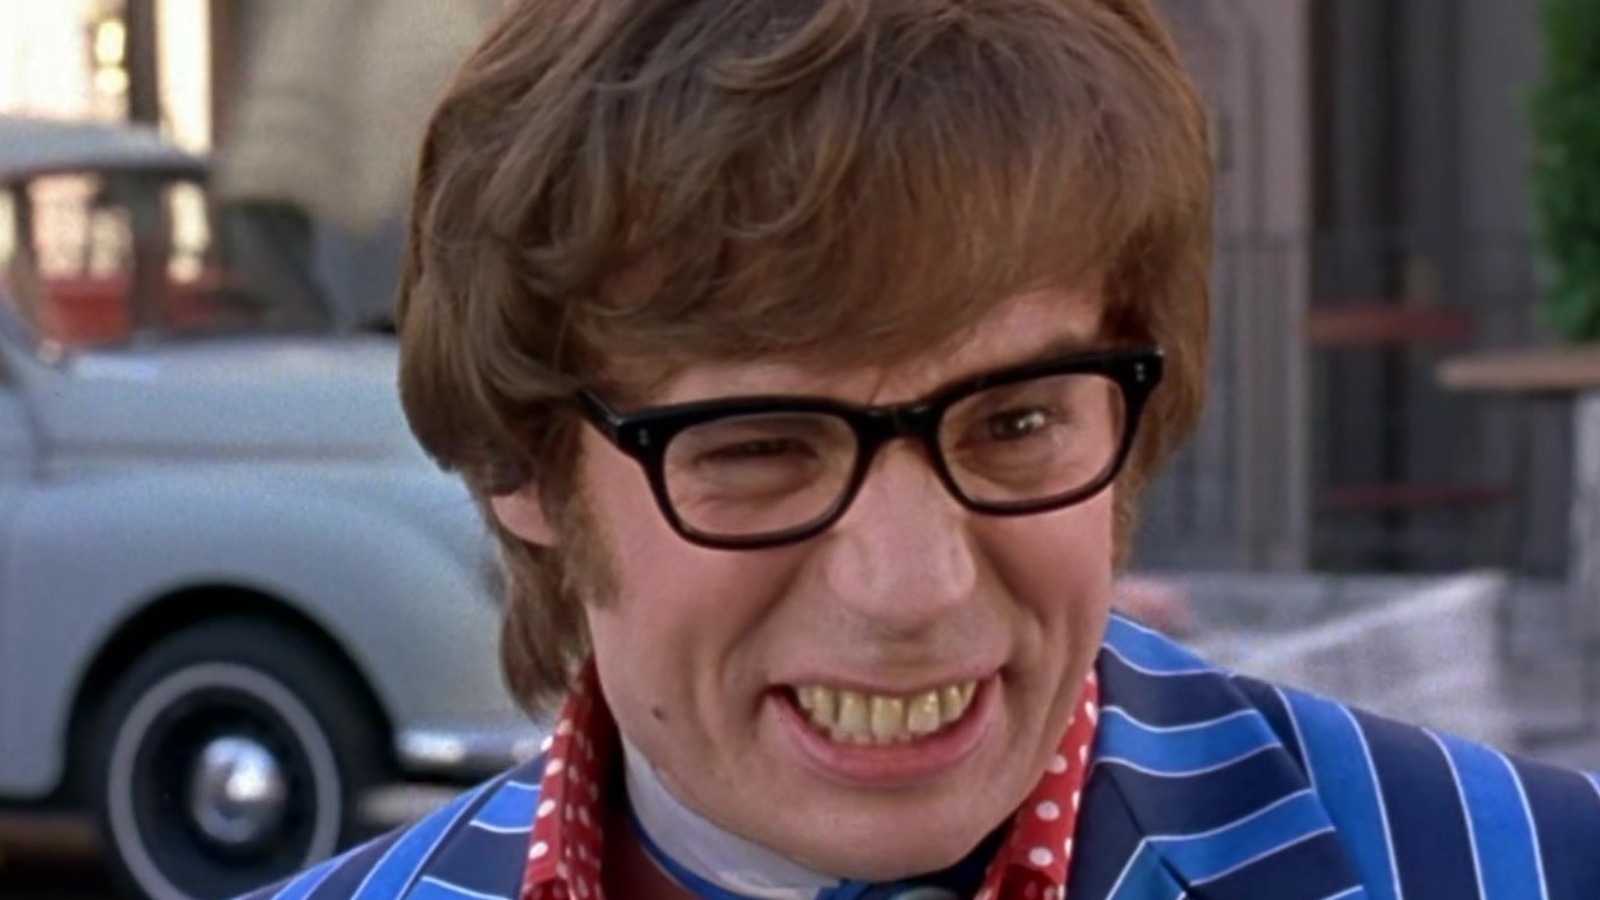 austin powers movies in chronological order